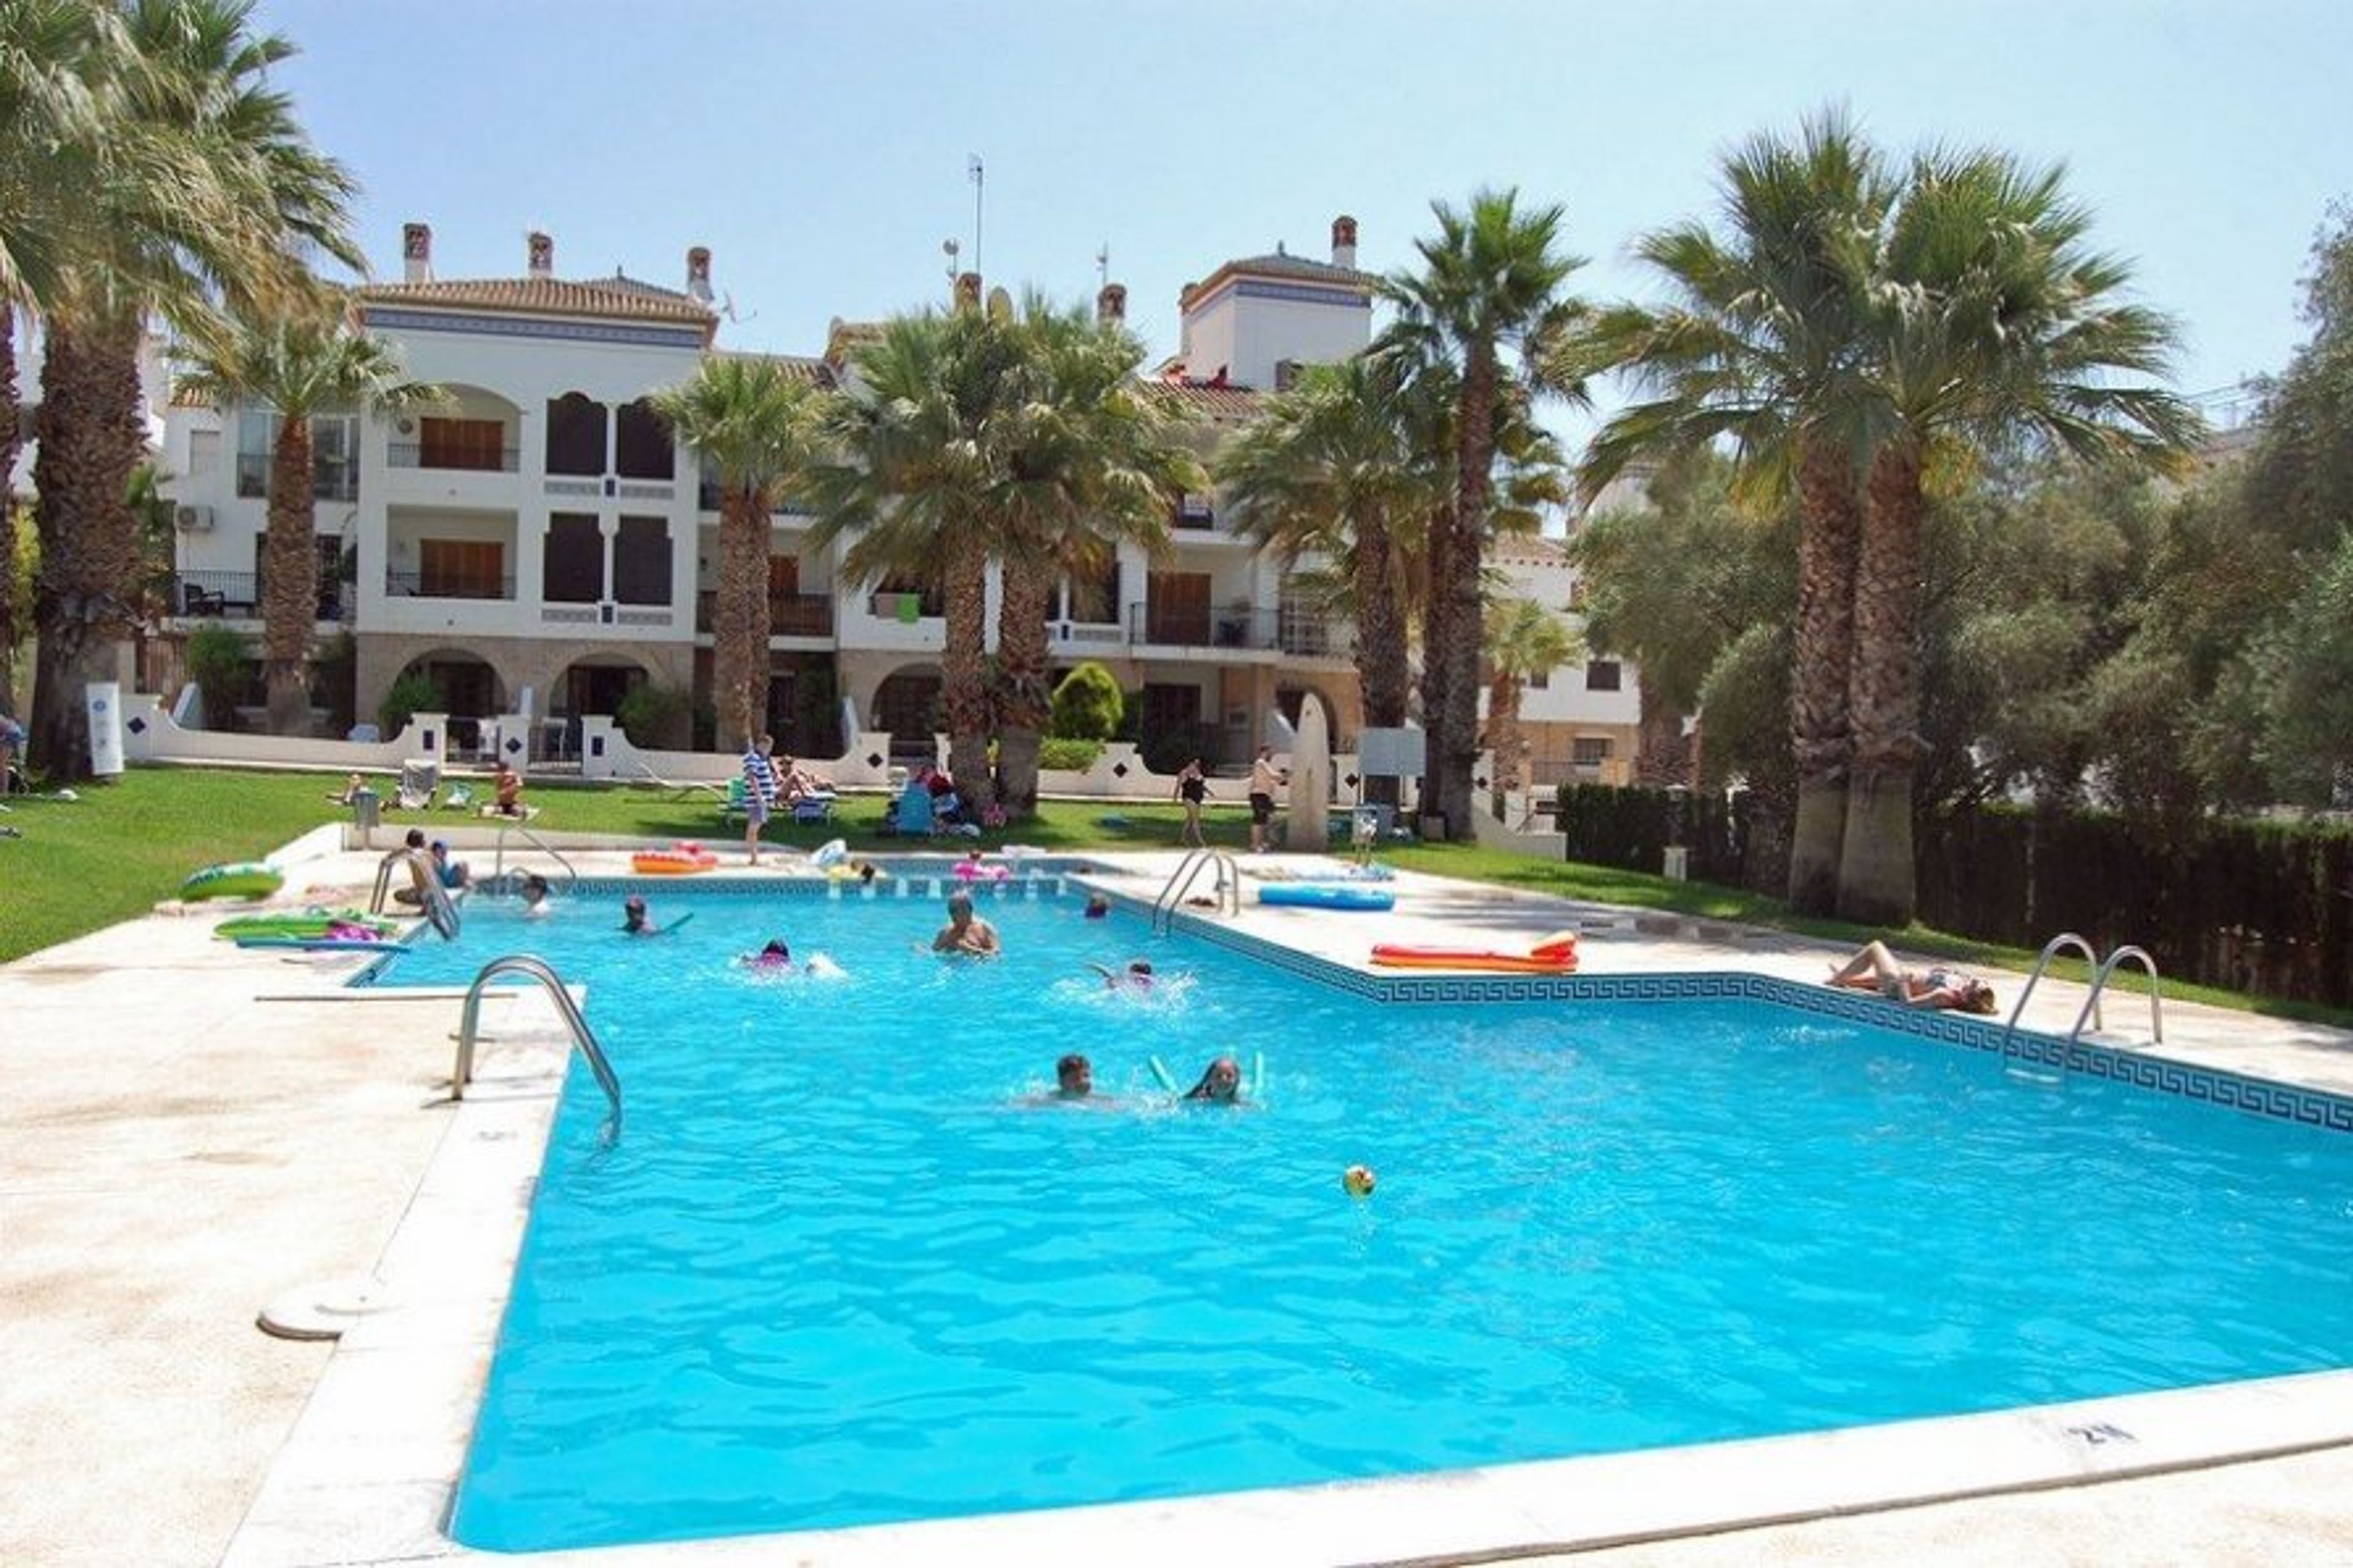 Communal Pool for the complex